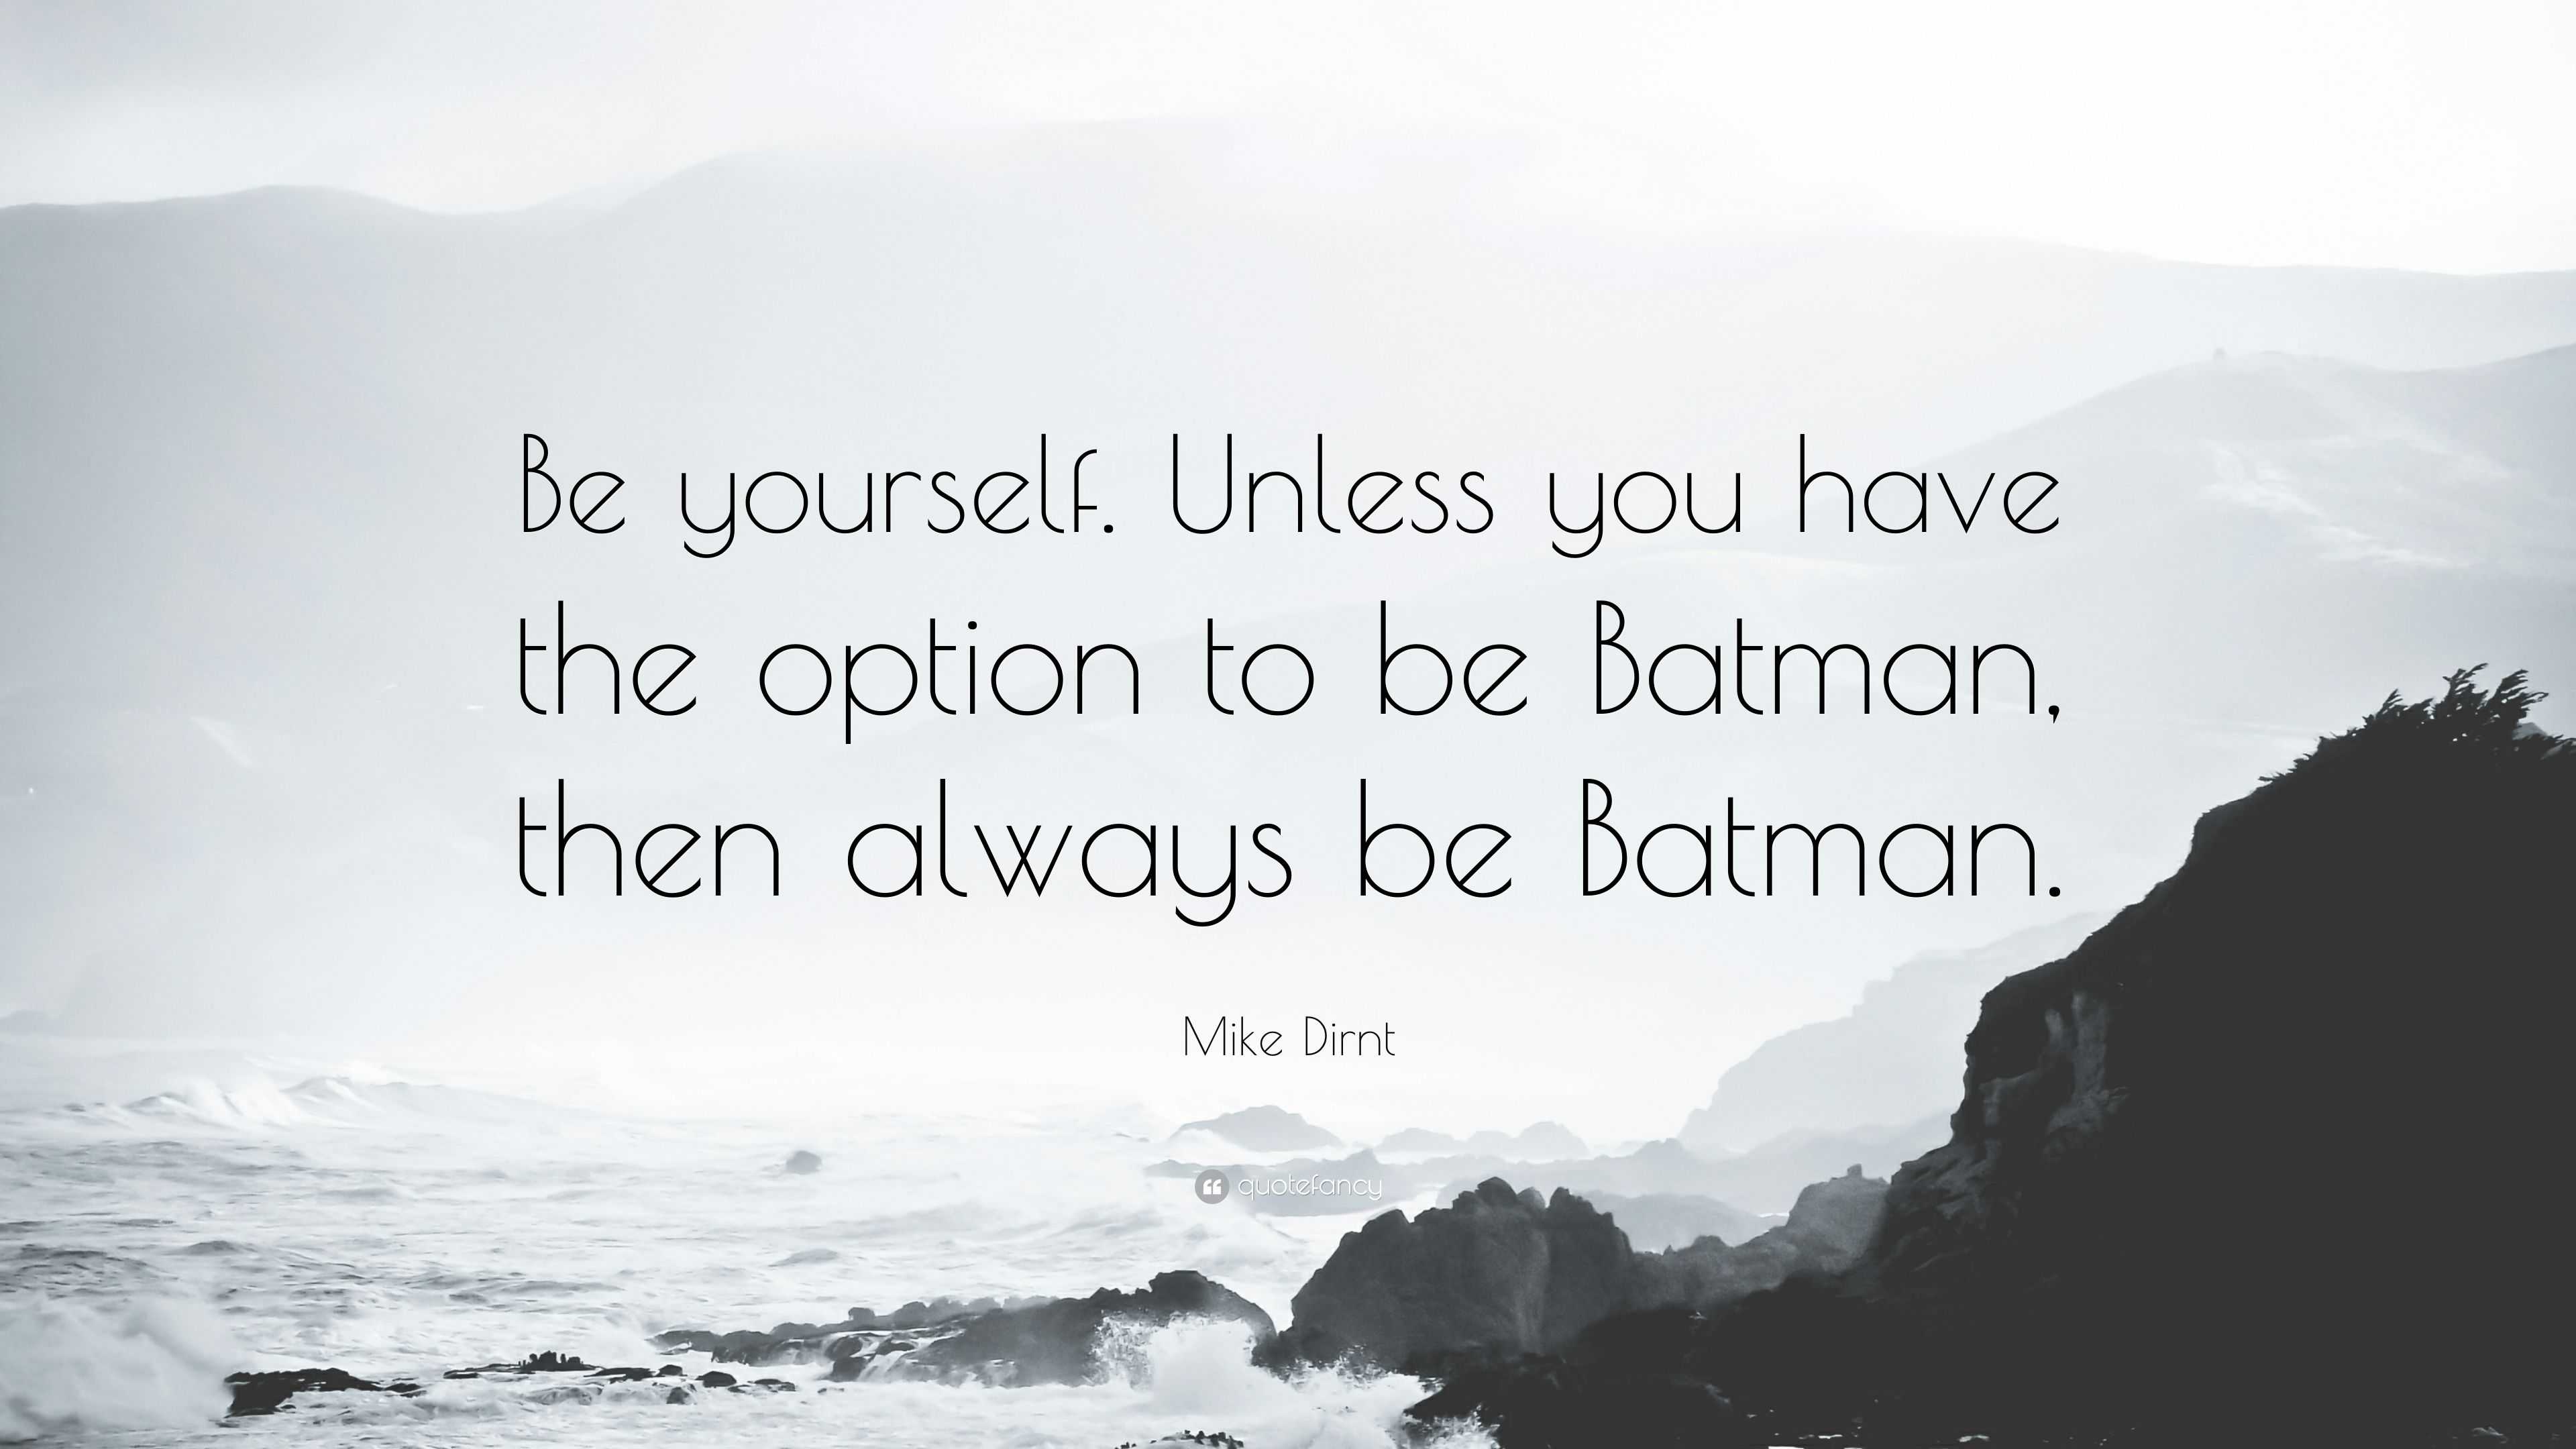 Mike Dirnt Quote: “Be yourself. Unless you have the option to be Batman,  then always be